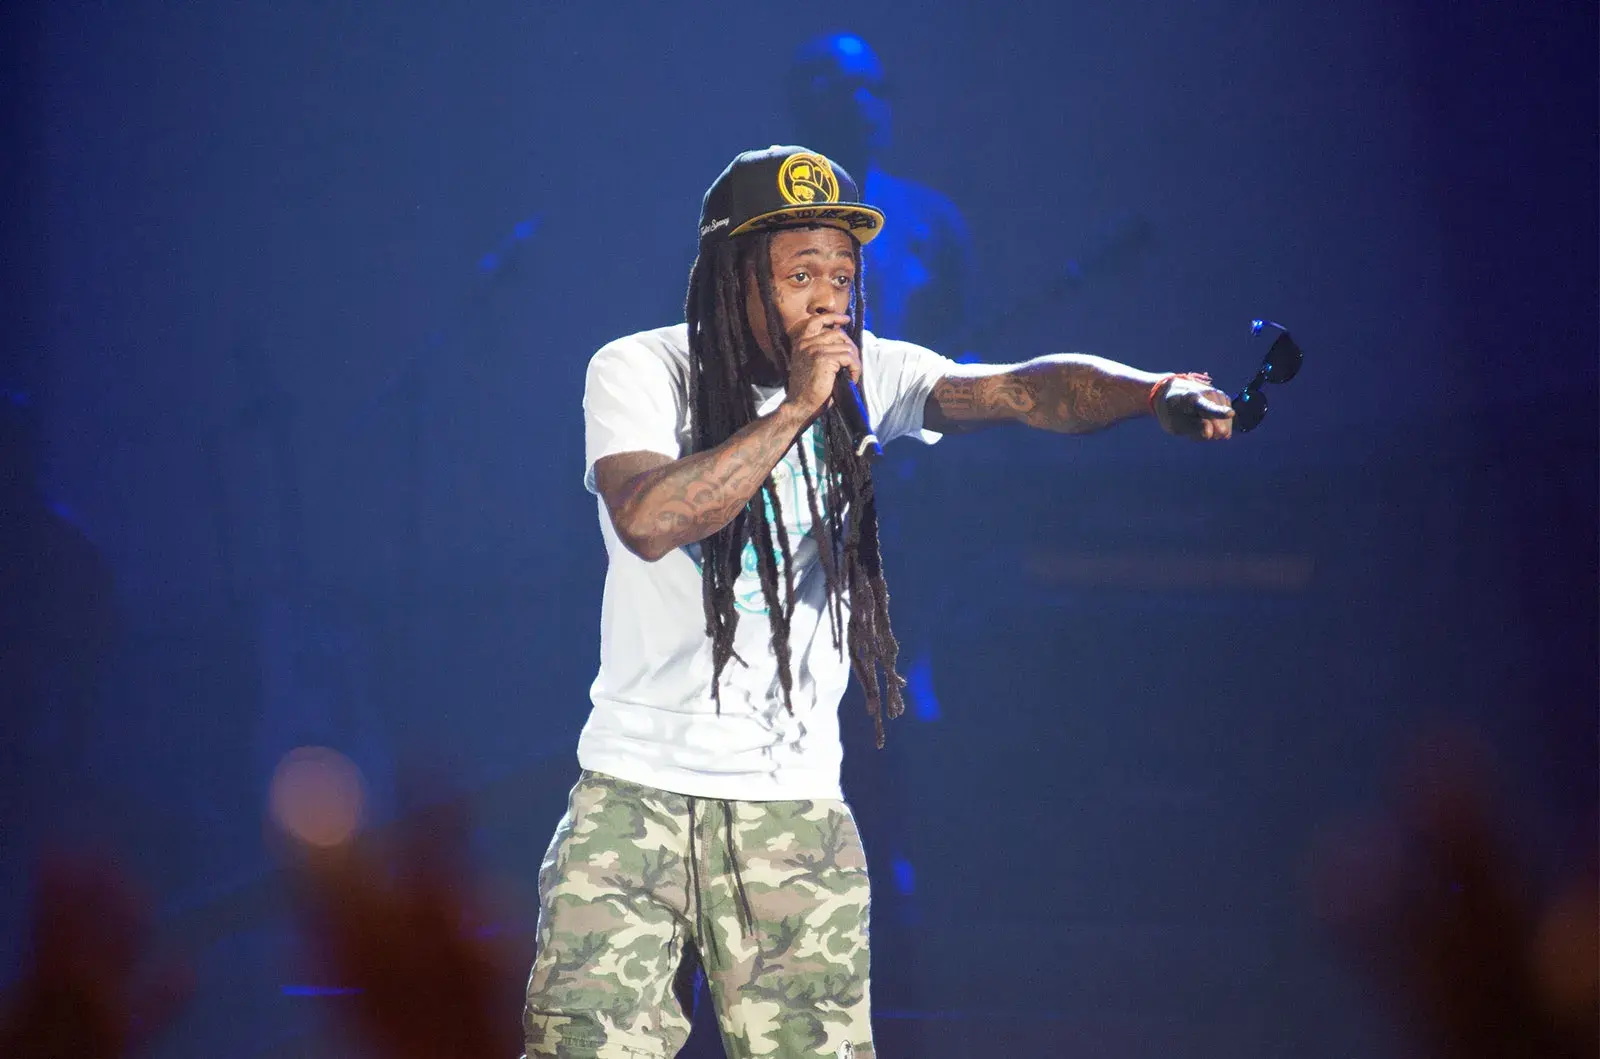 Lil Wayne performs at a live concert, showcasing his unique style in a white T-shirt and camouflage pants, complemented by a distinctive gold cap. Engaged with the audience, he delivers his lyrics with intensity under the bright stage lights, exemplifying the dynamic energy he is known for.